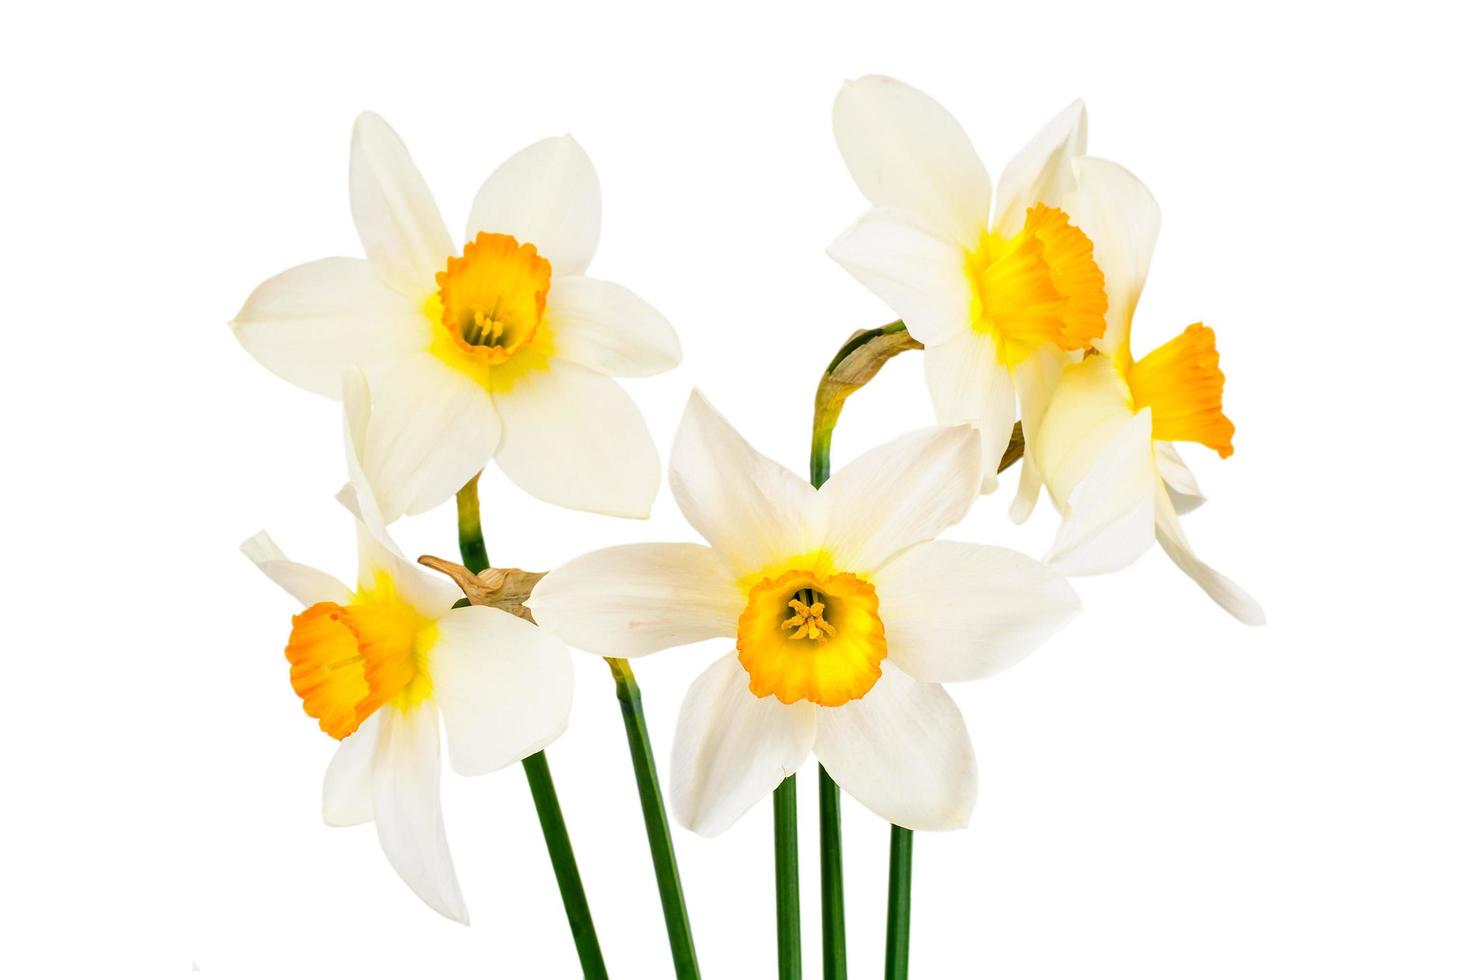 Beautiful Spring Flowers Narcissus on White Background photo